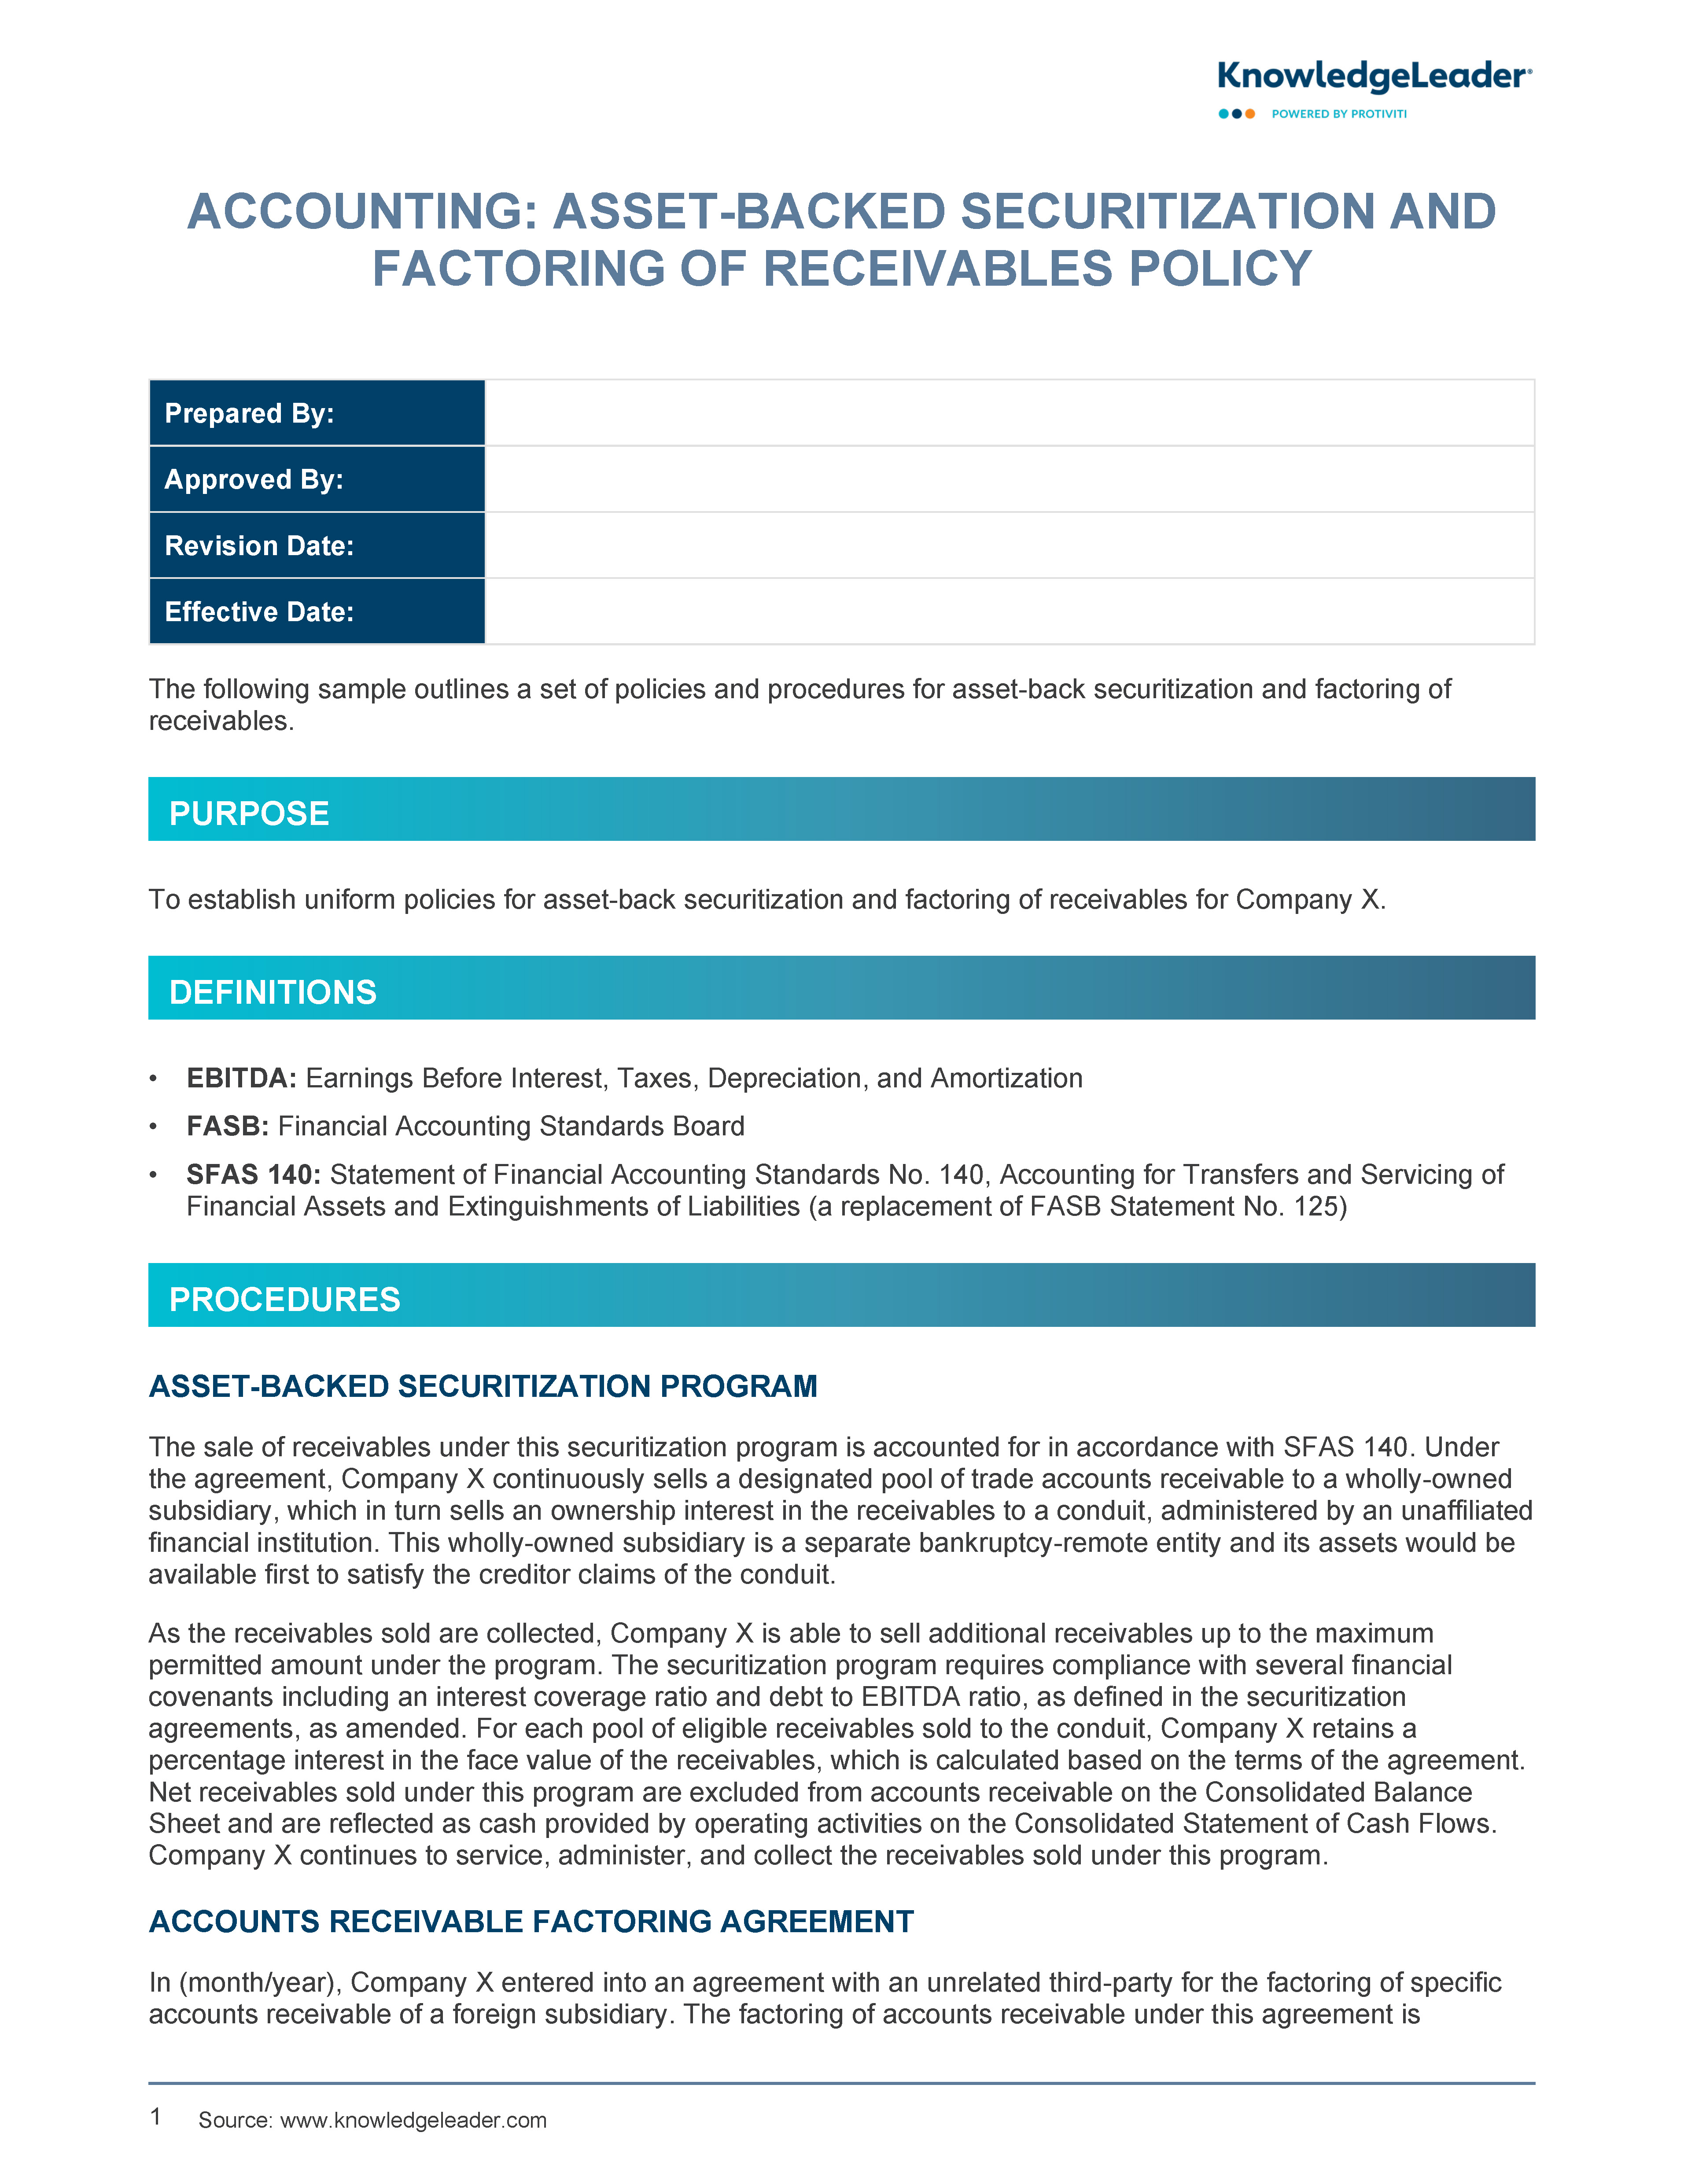 Screenshot of the first page of Asset-Backed Securitization and Factoring of Receivables Policy